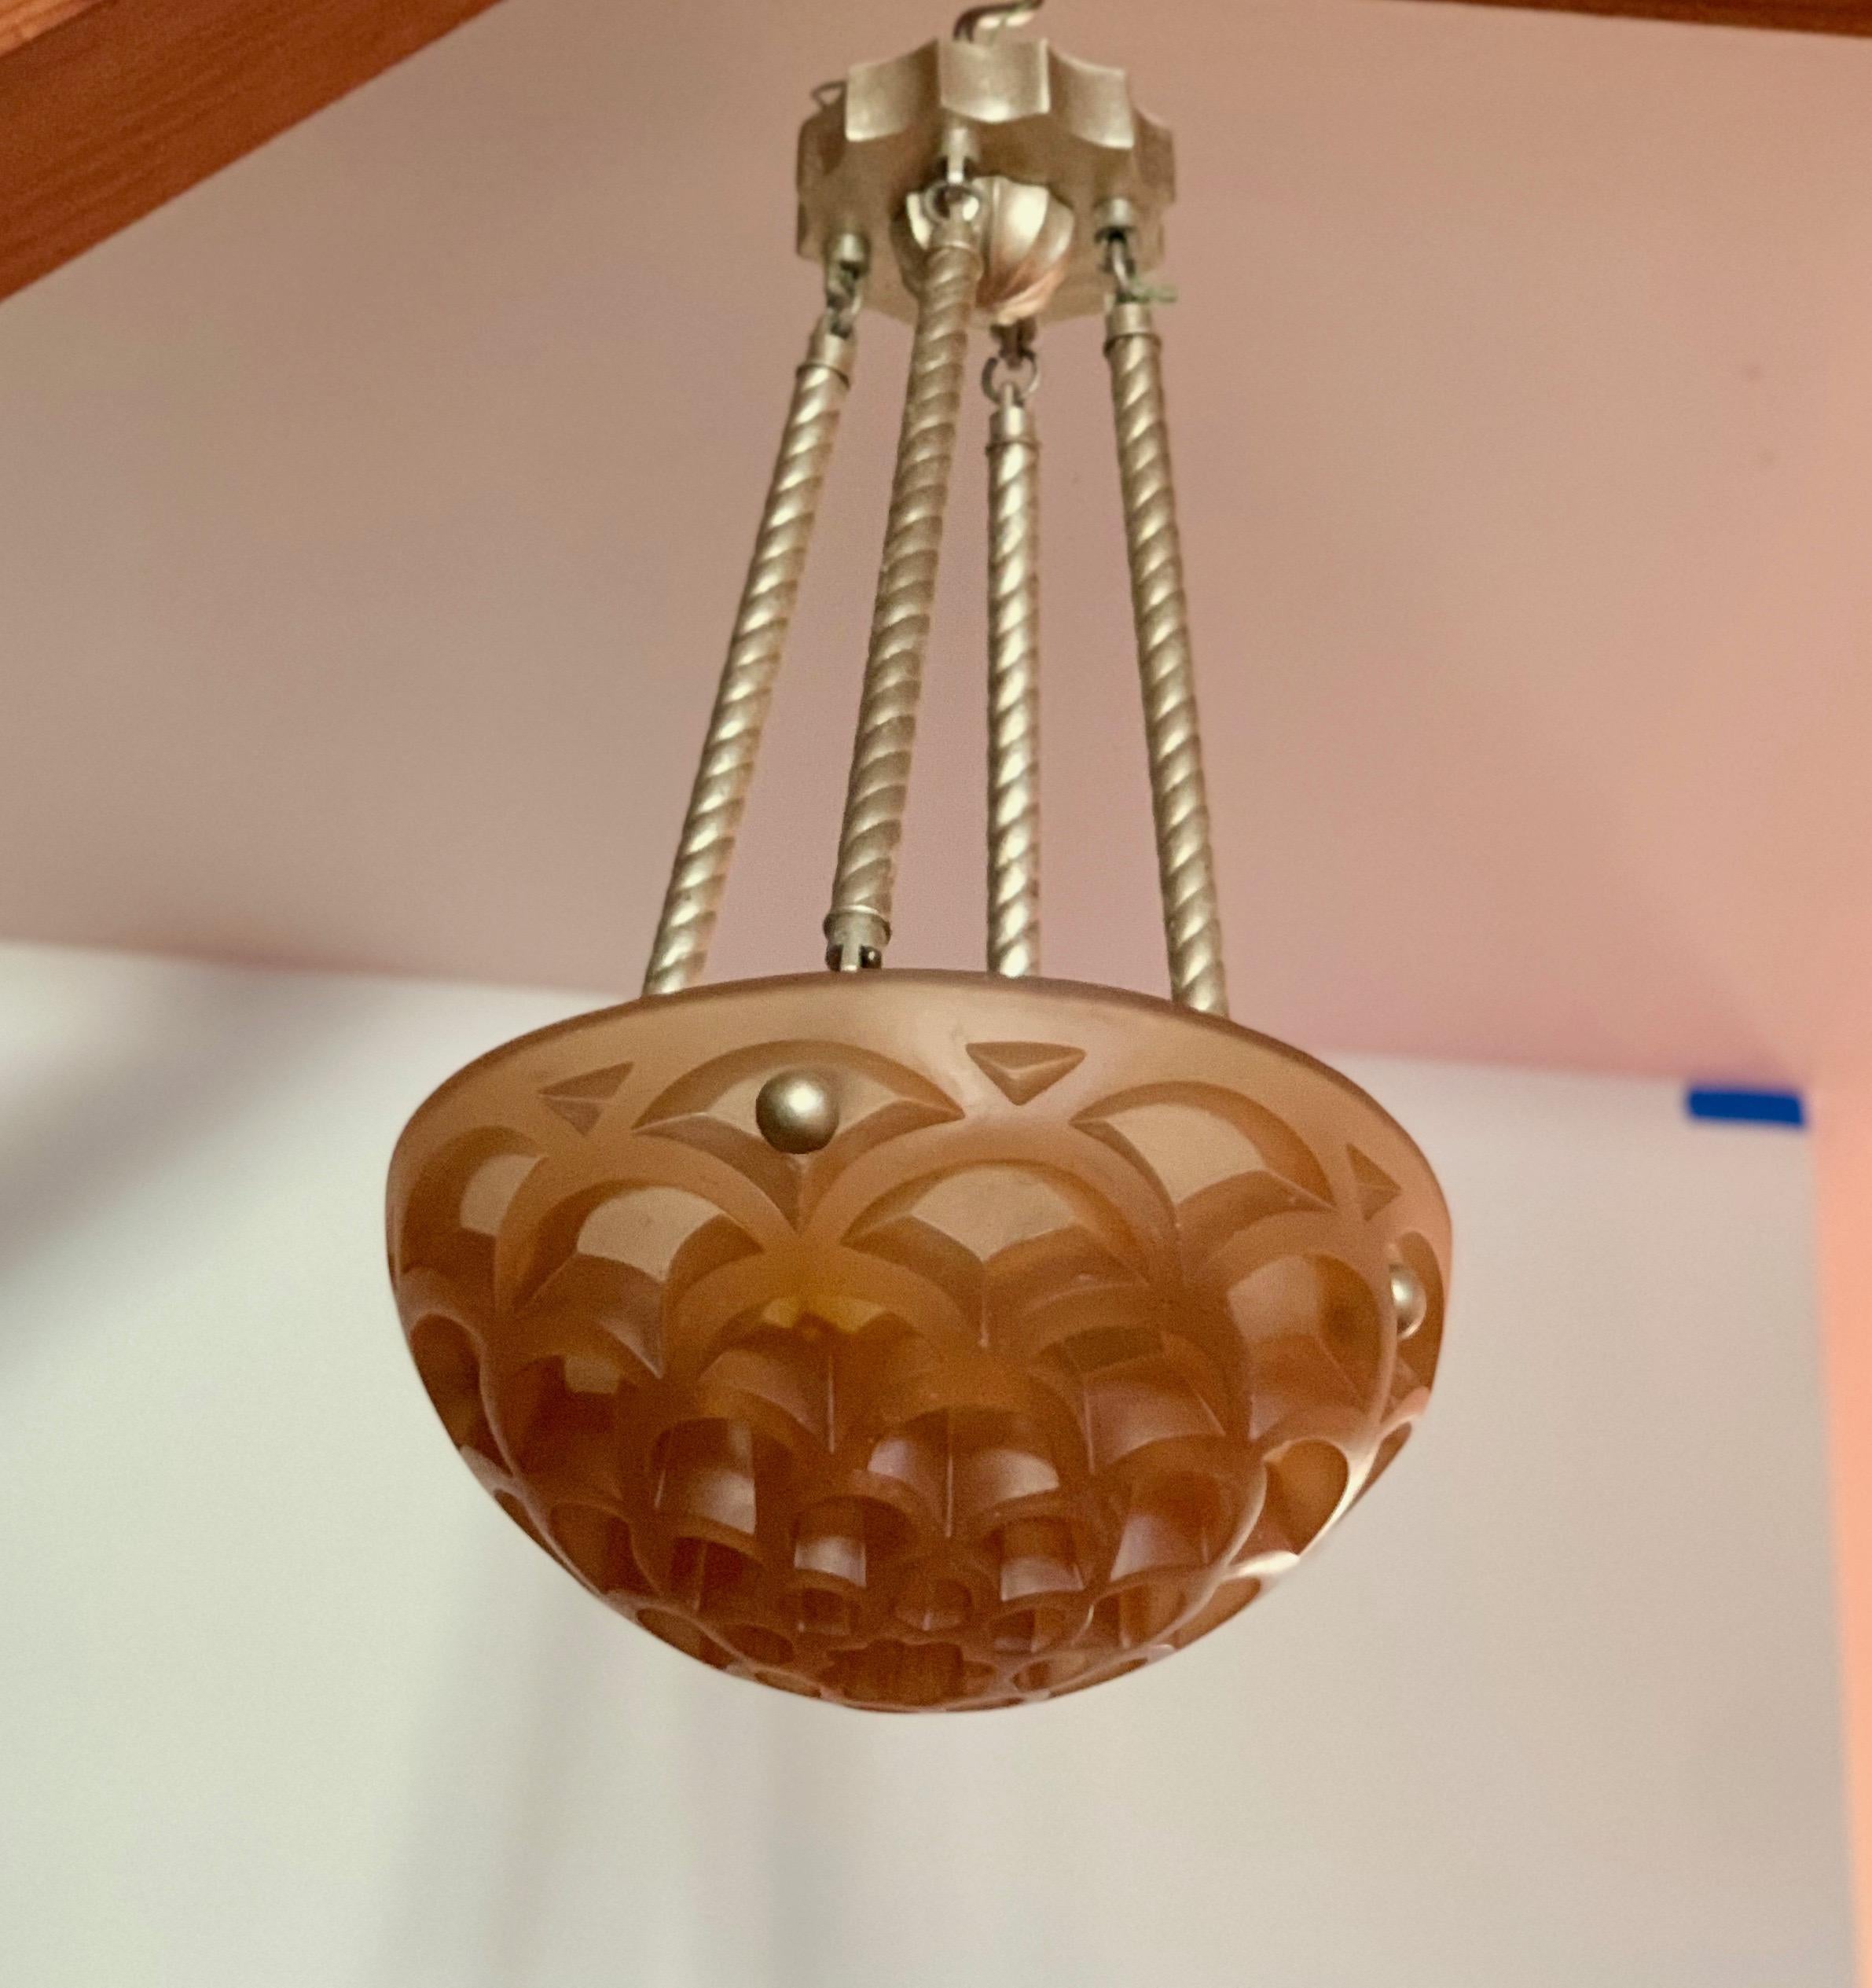 Gorgeous light fixture from the famed NY lighting manufacturer Sirmos, that specialized in resin and plaster, sculptural lighting of all sorts. The current iteration of 